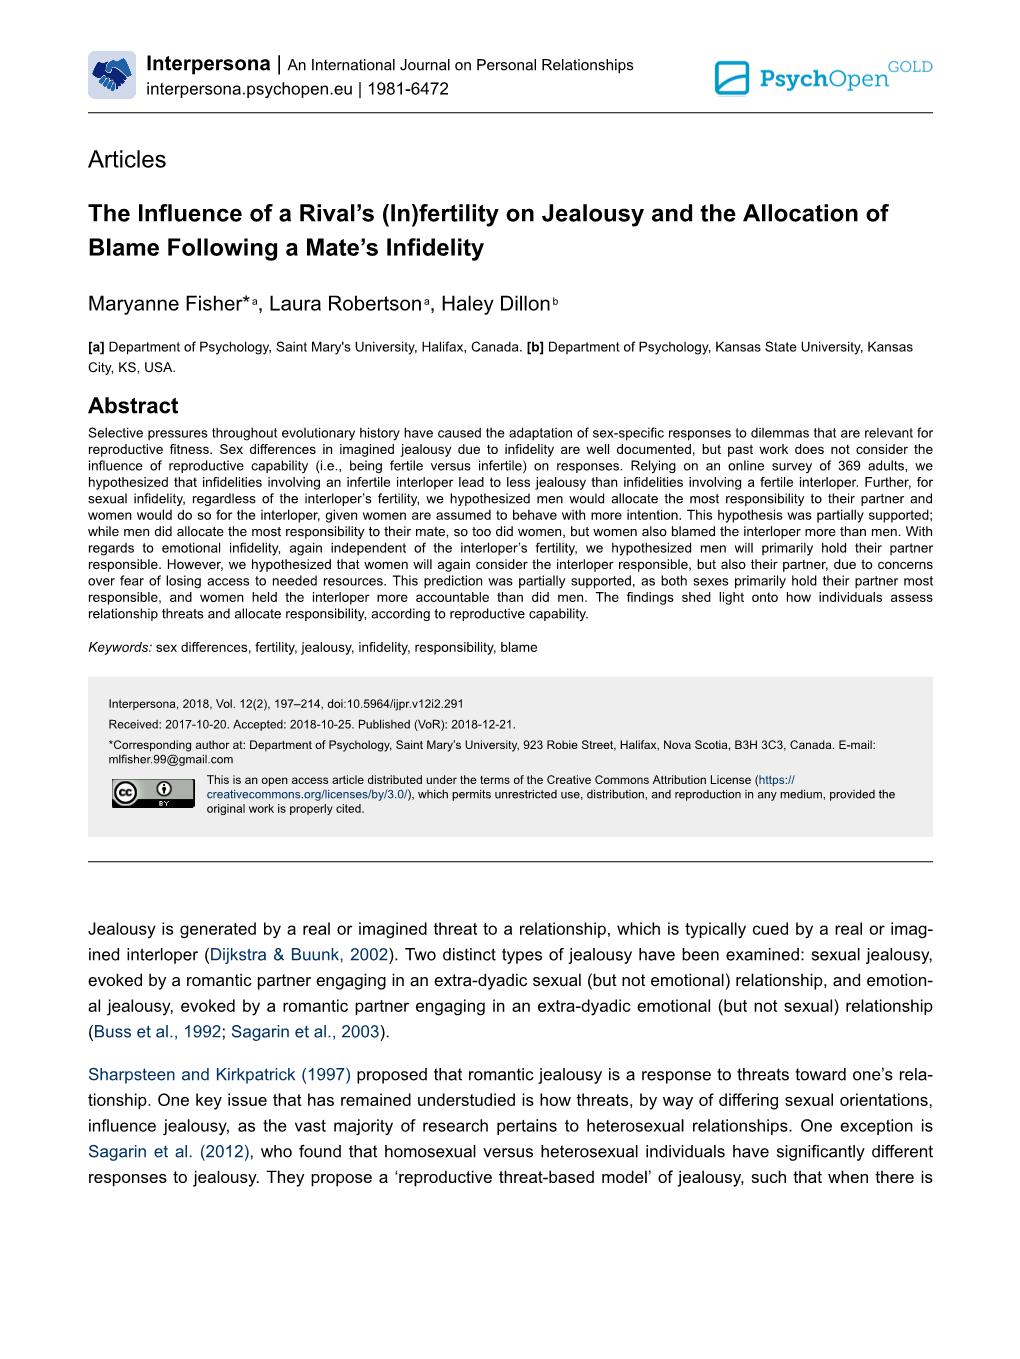 (In)Fertility on Jealousy and the Allocation of Blame Following a Mate’S Infidelity